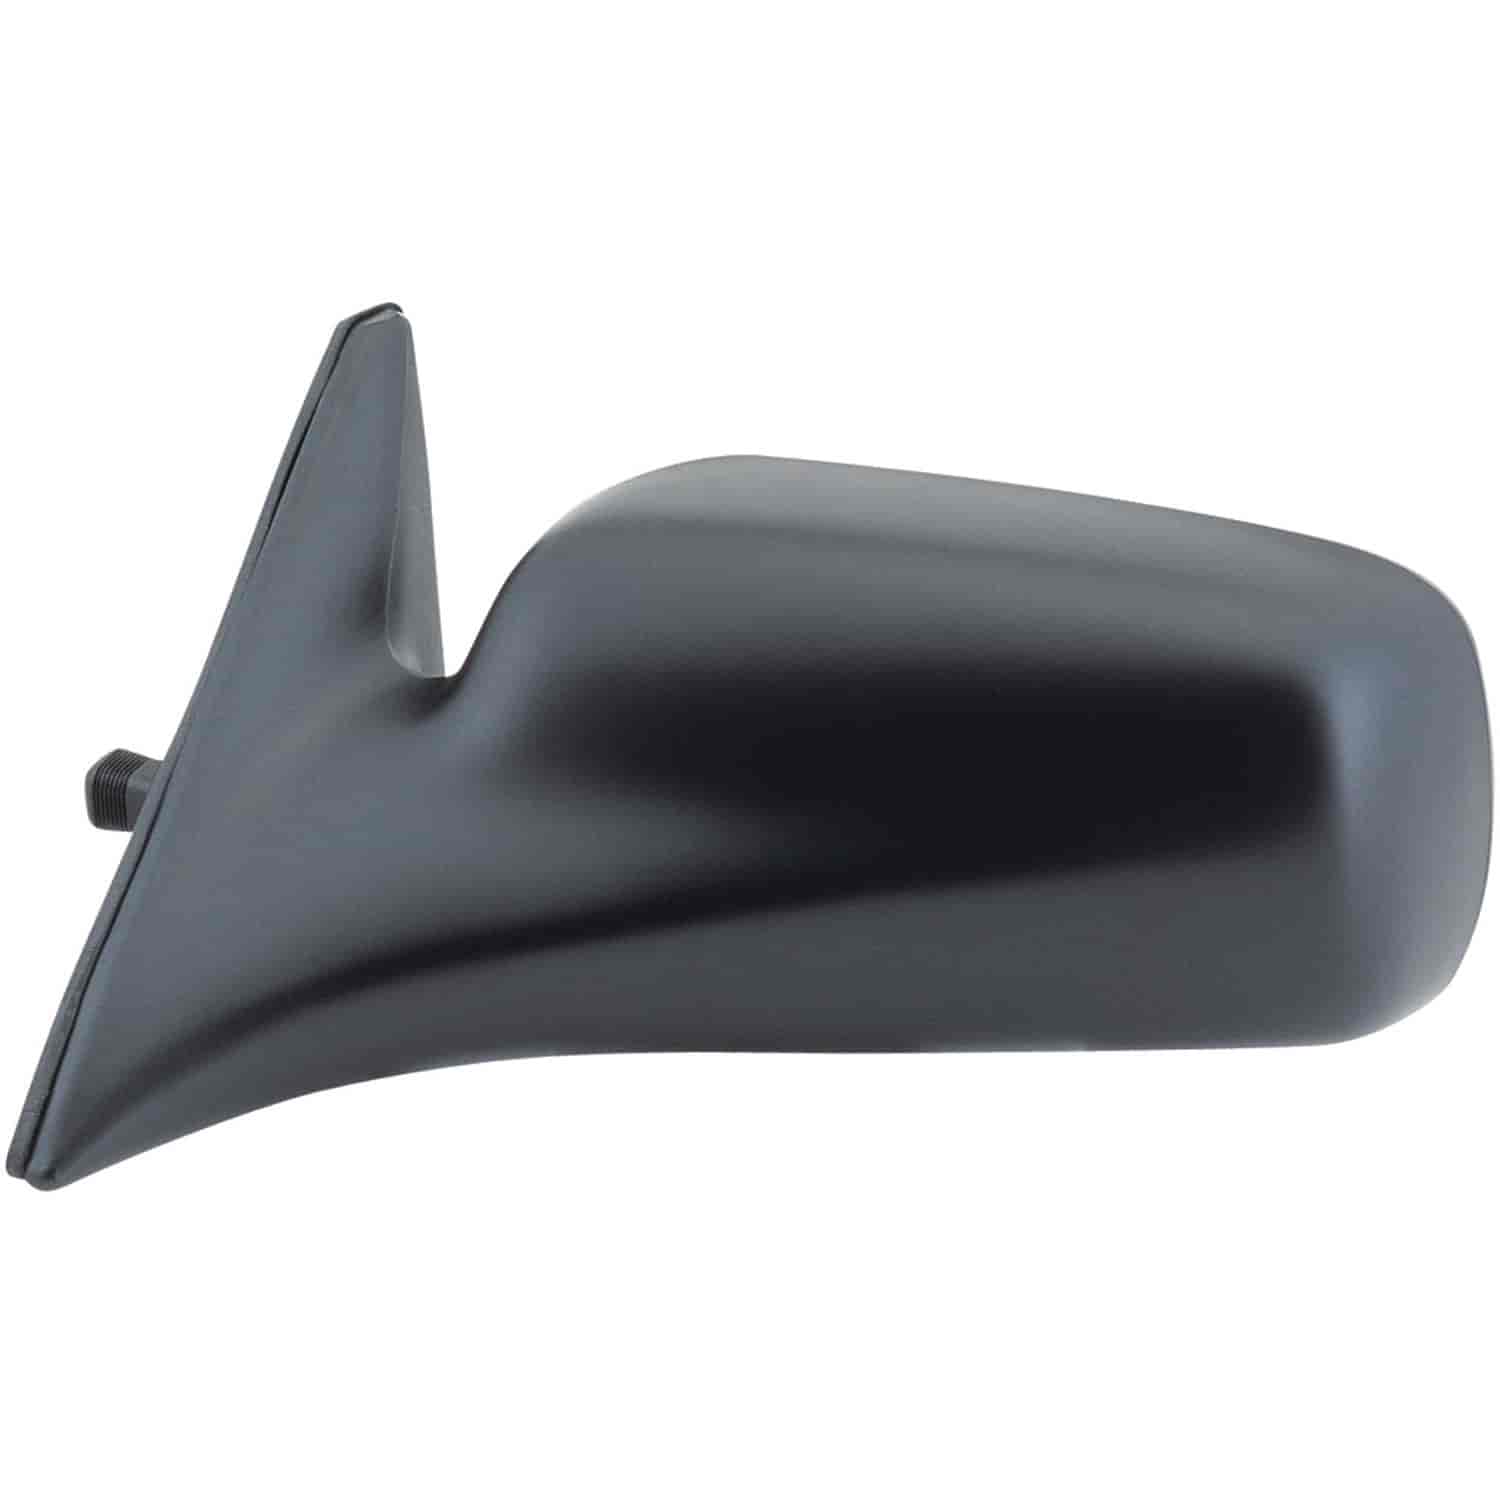 OEM Style Replacement mirror for 87-91 Toyota Camry Sedan driver side mirror tested to fit and funct